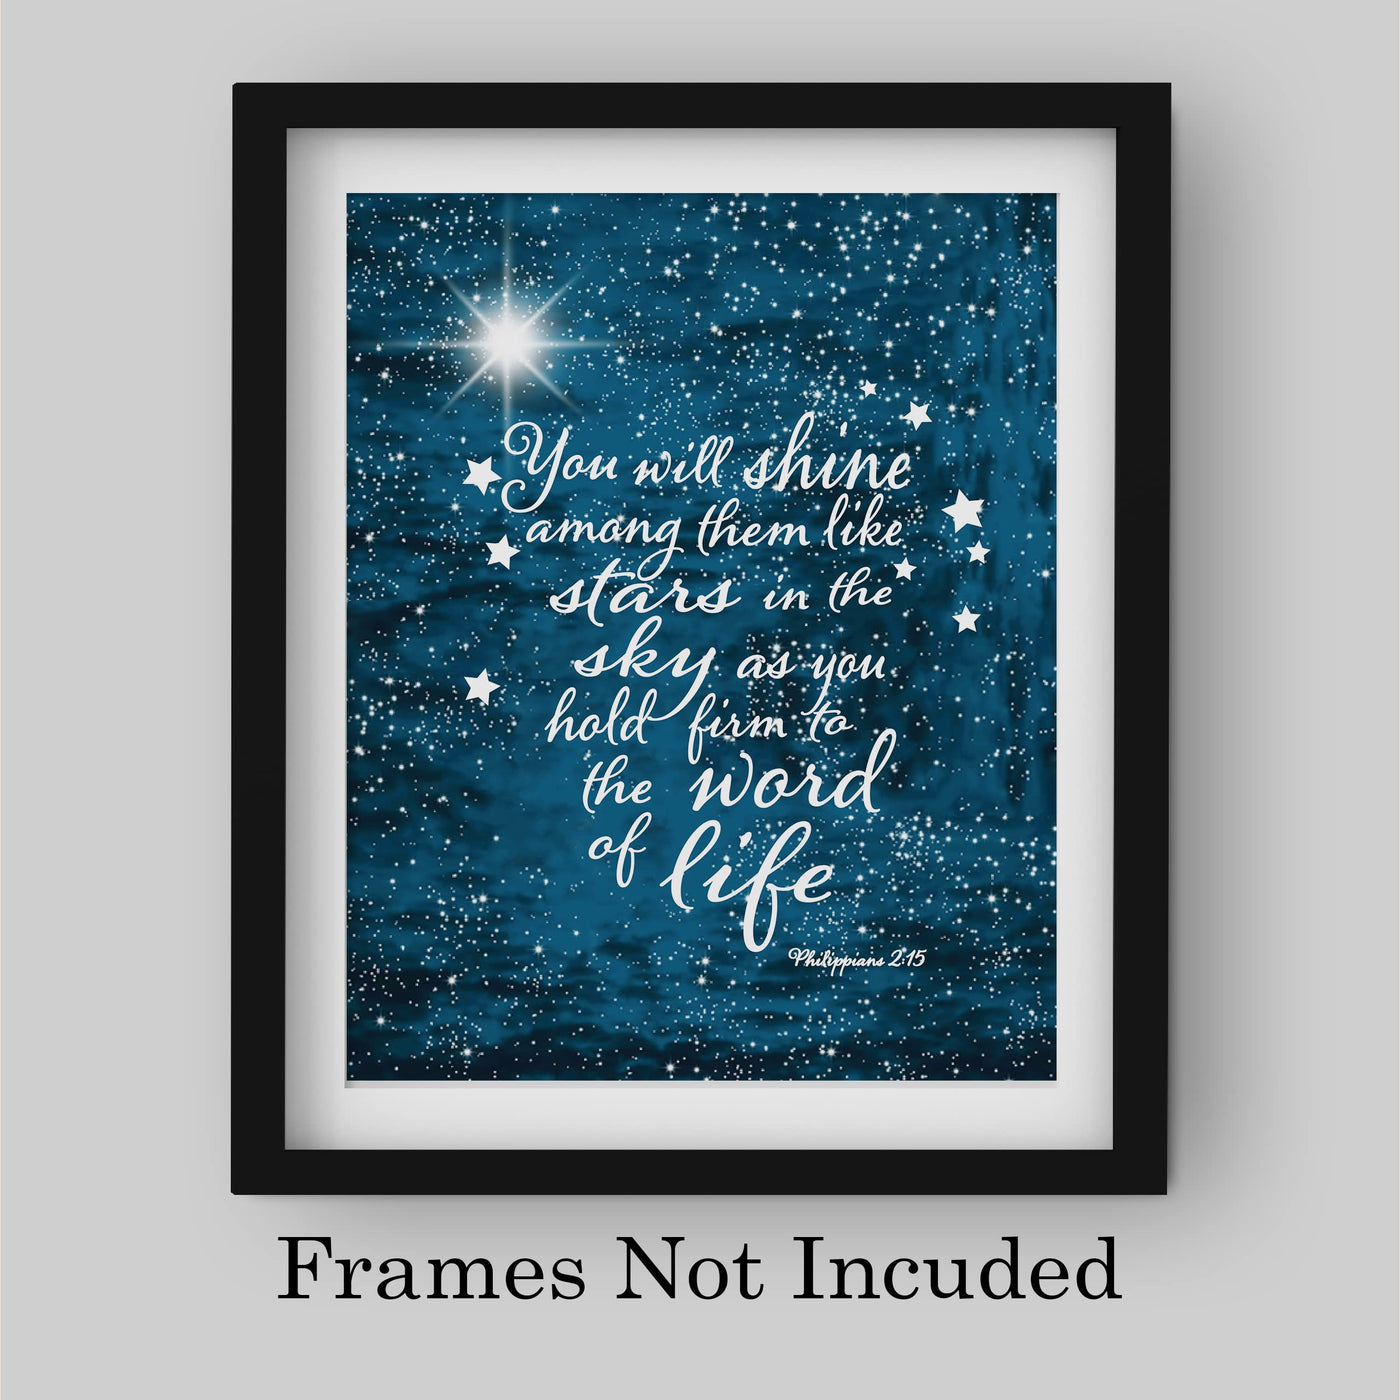 ?You Will Shine Like Stars in the Sky?- Philippians 2:15- Bible Verse Wall Art- 8 x 10" Starry Typographic Design. Scripture Wall Print-Ready to Frame. Home-Office-Church D?cor. Great Christian Gift!